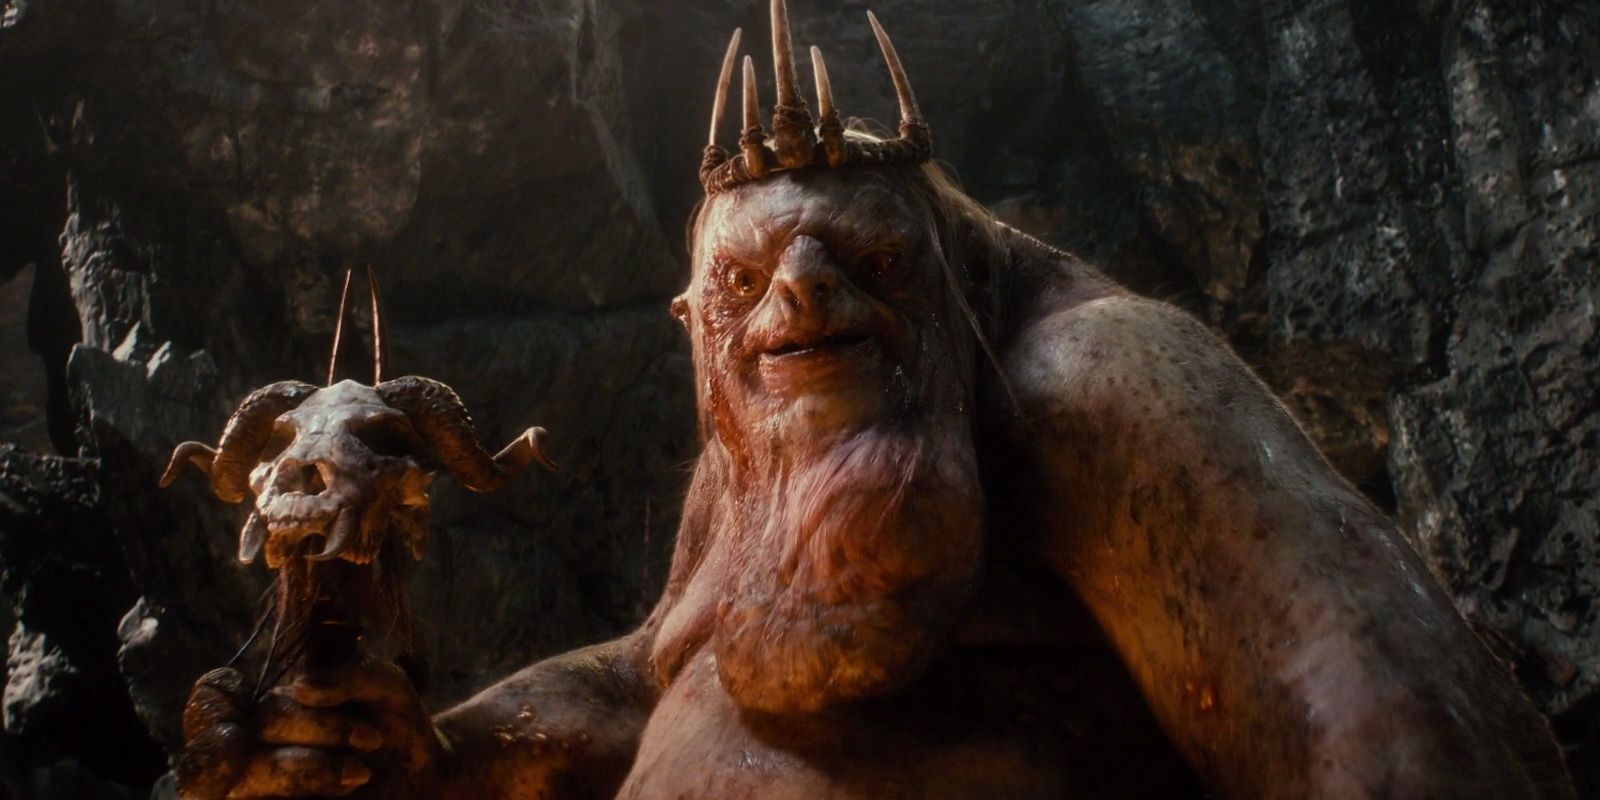 The Great Goblin making faces in The Hobbit